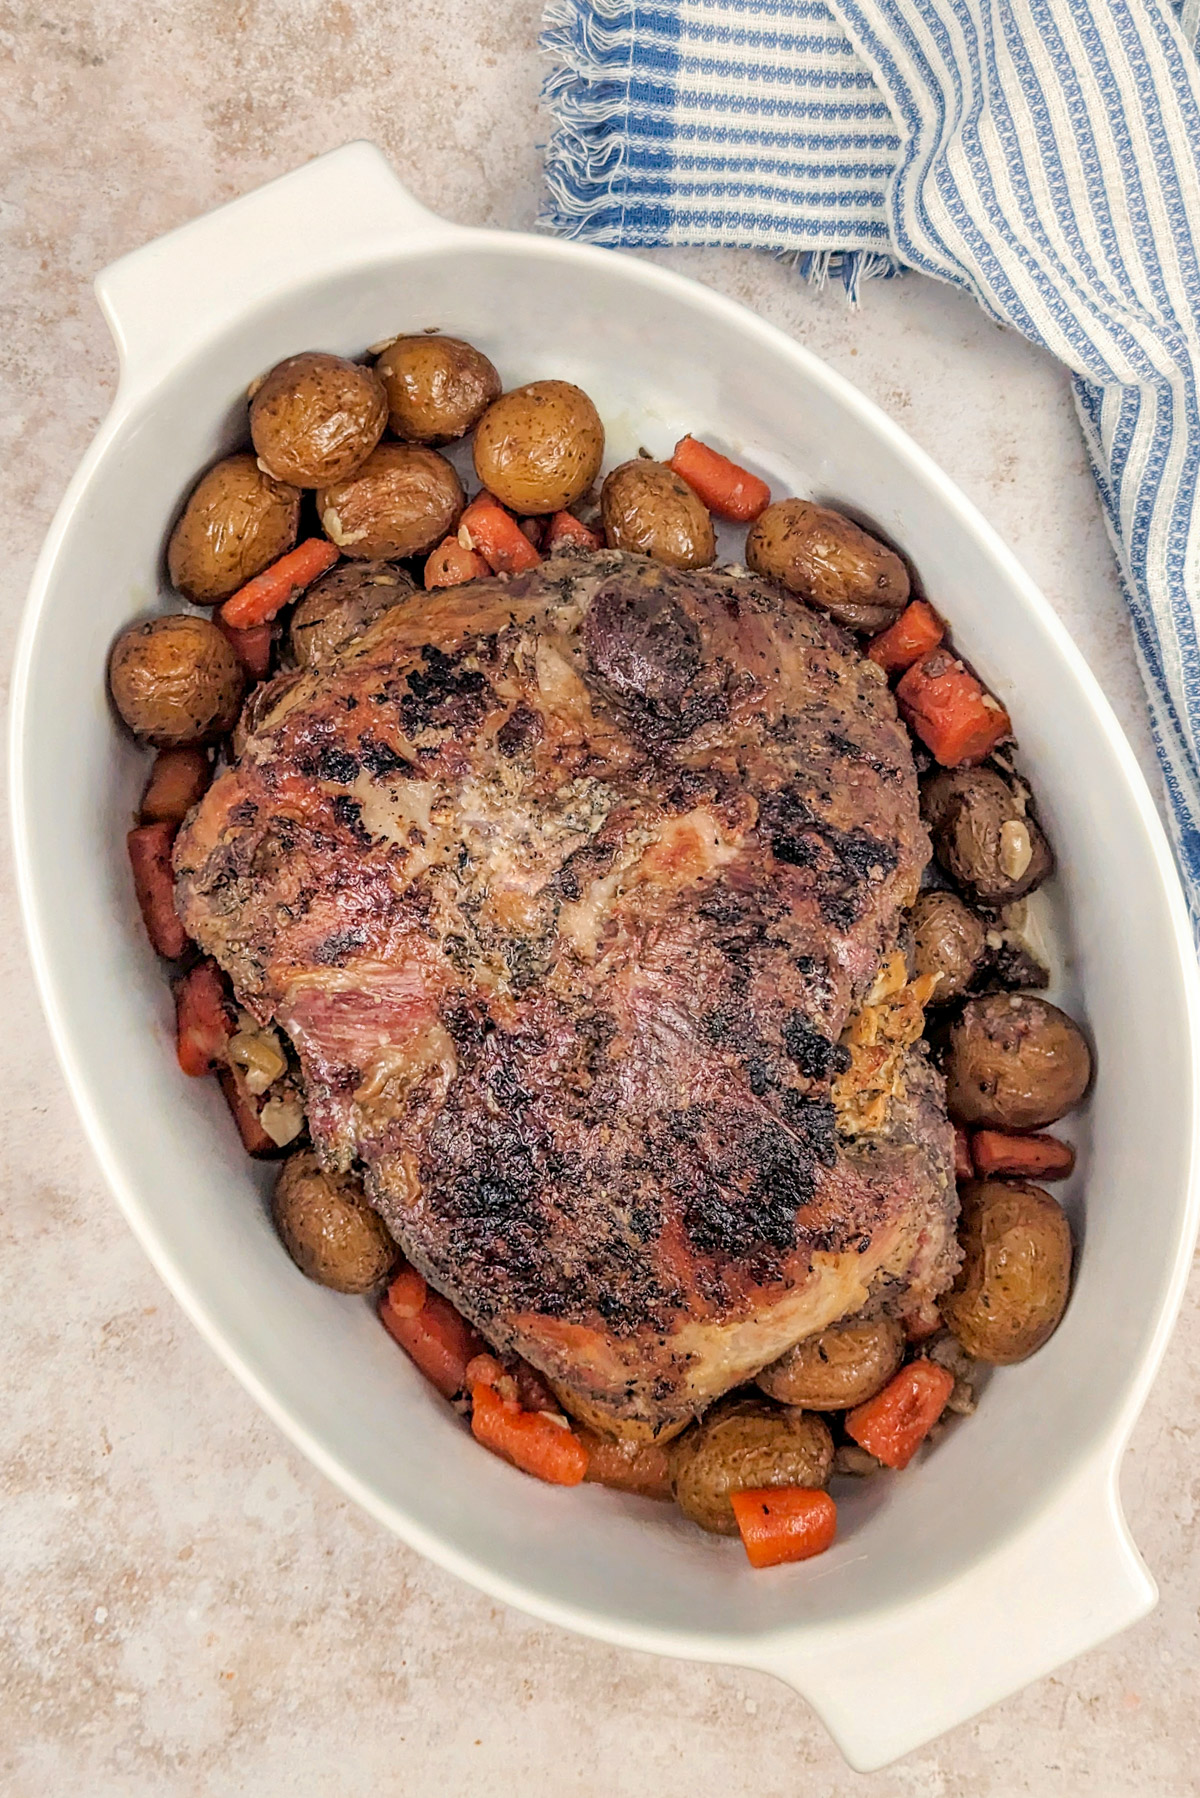 Boneless leg of lamb in a serving bowl with vegetables.